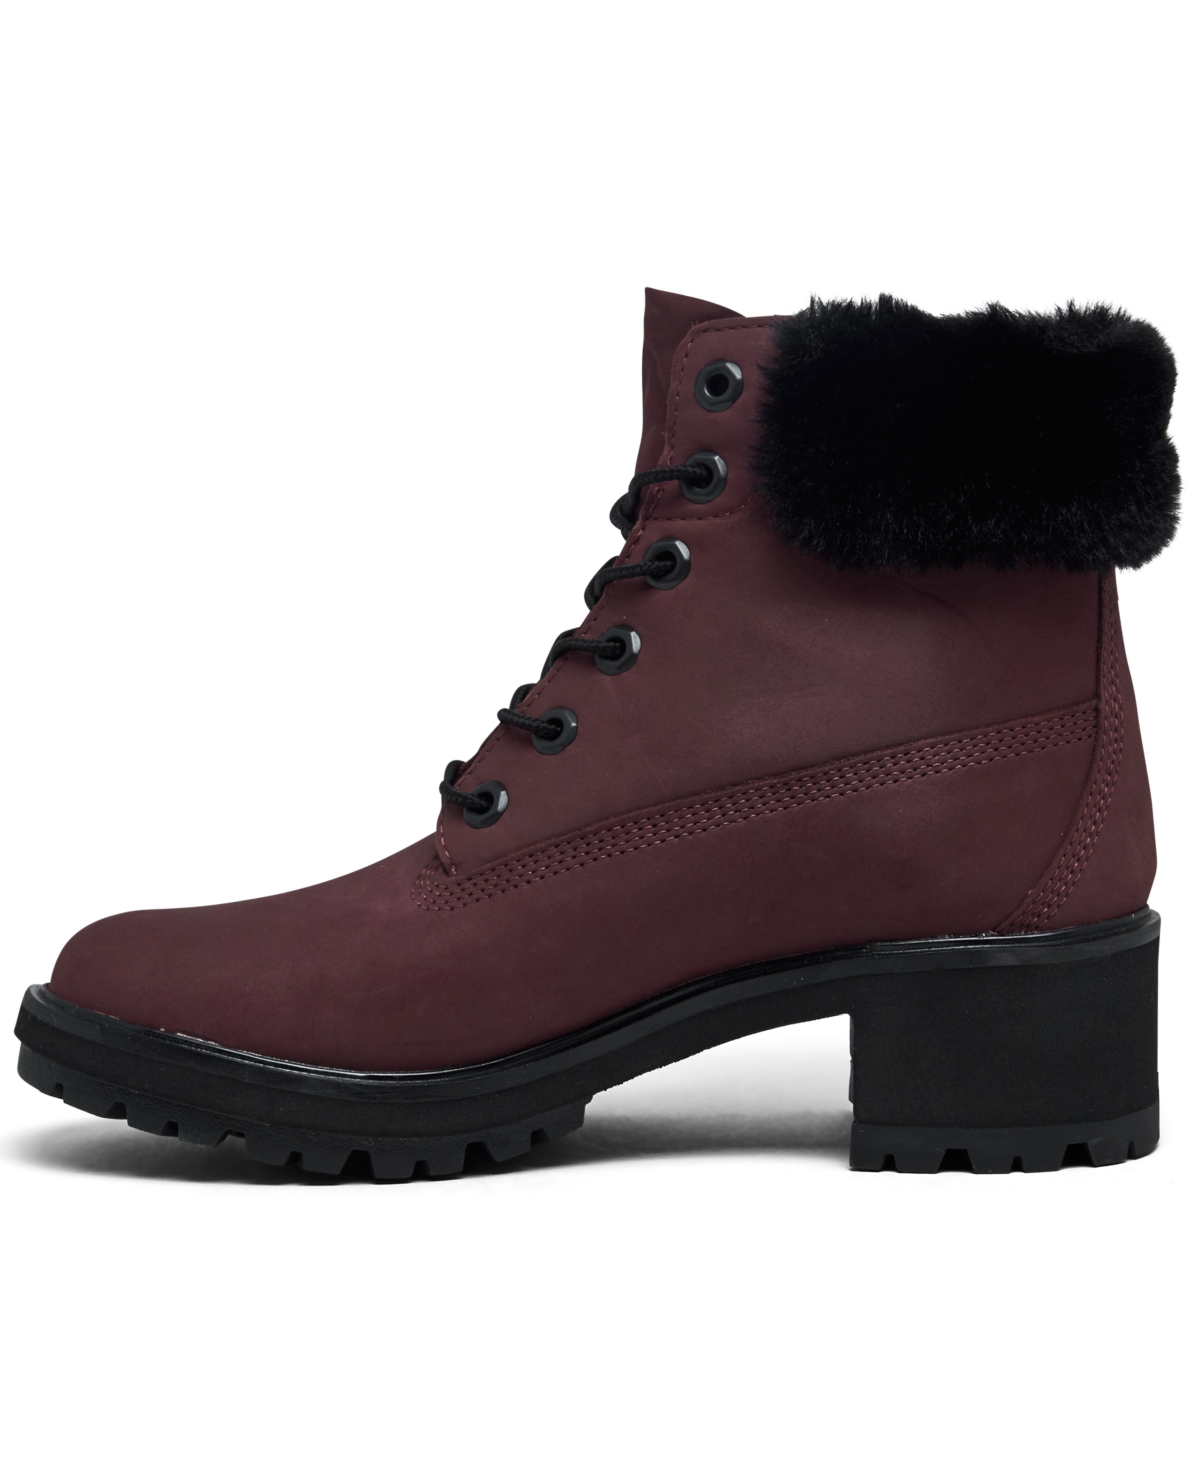 Shop Timberland Women's Kinsley 6" Water-resistant Boots From Finish Line In Dark Port